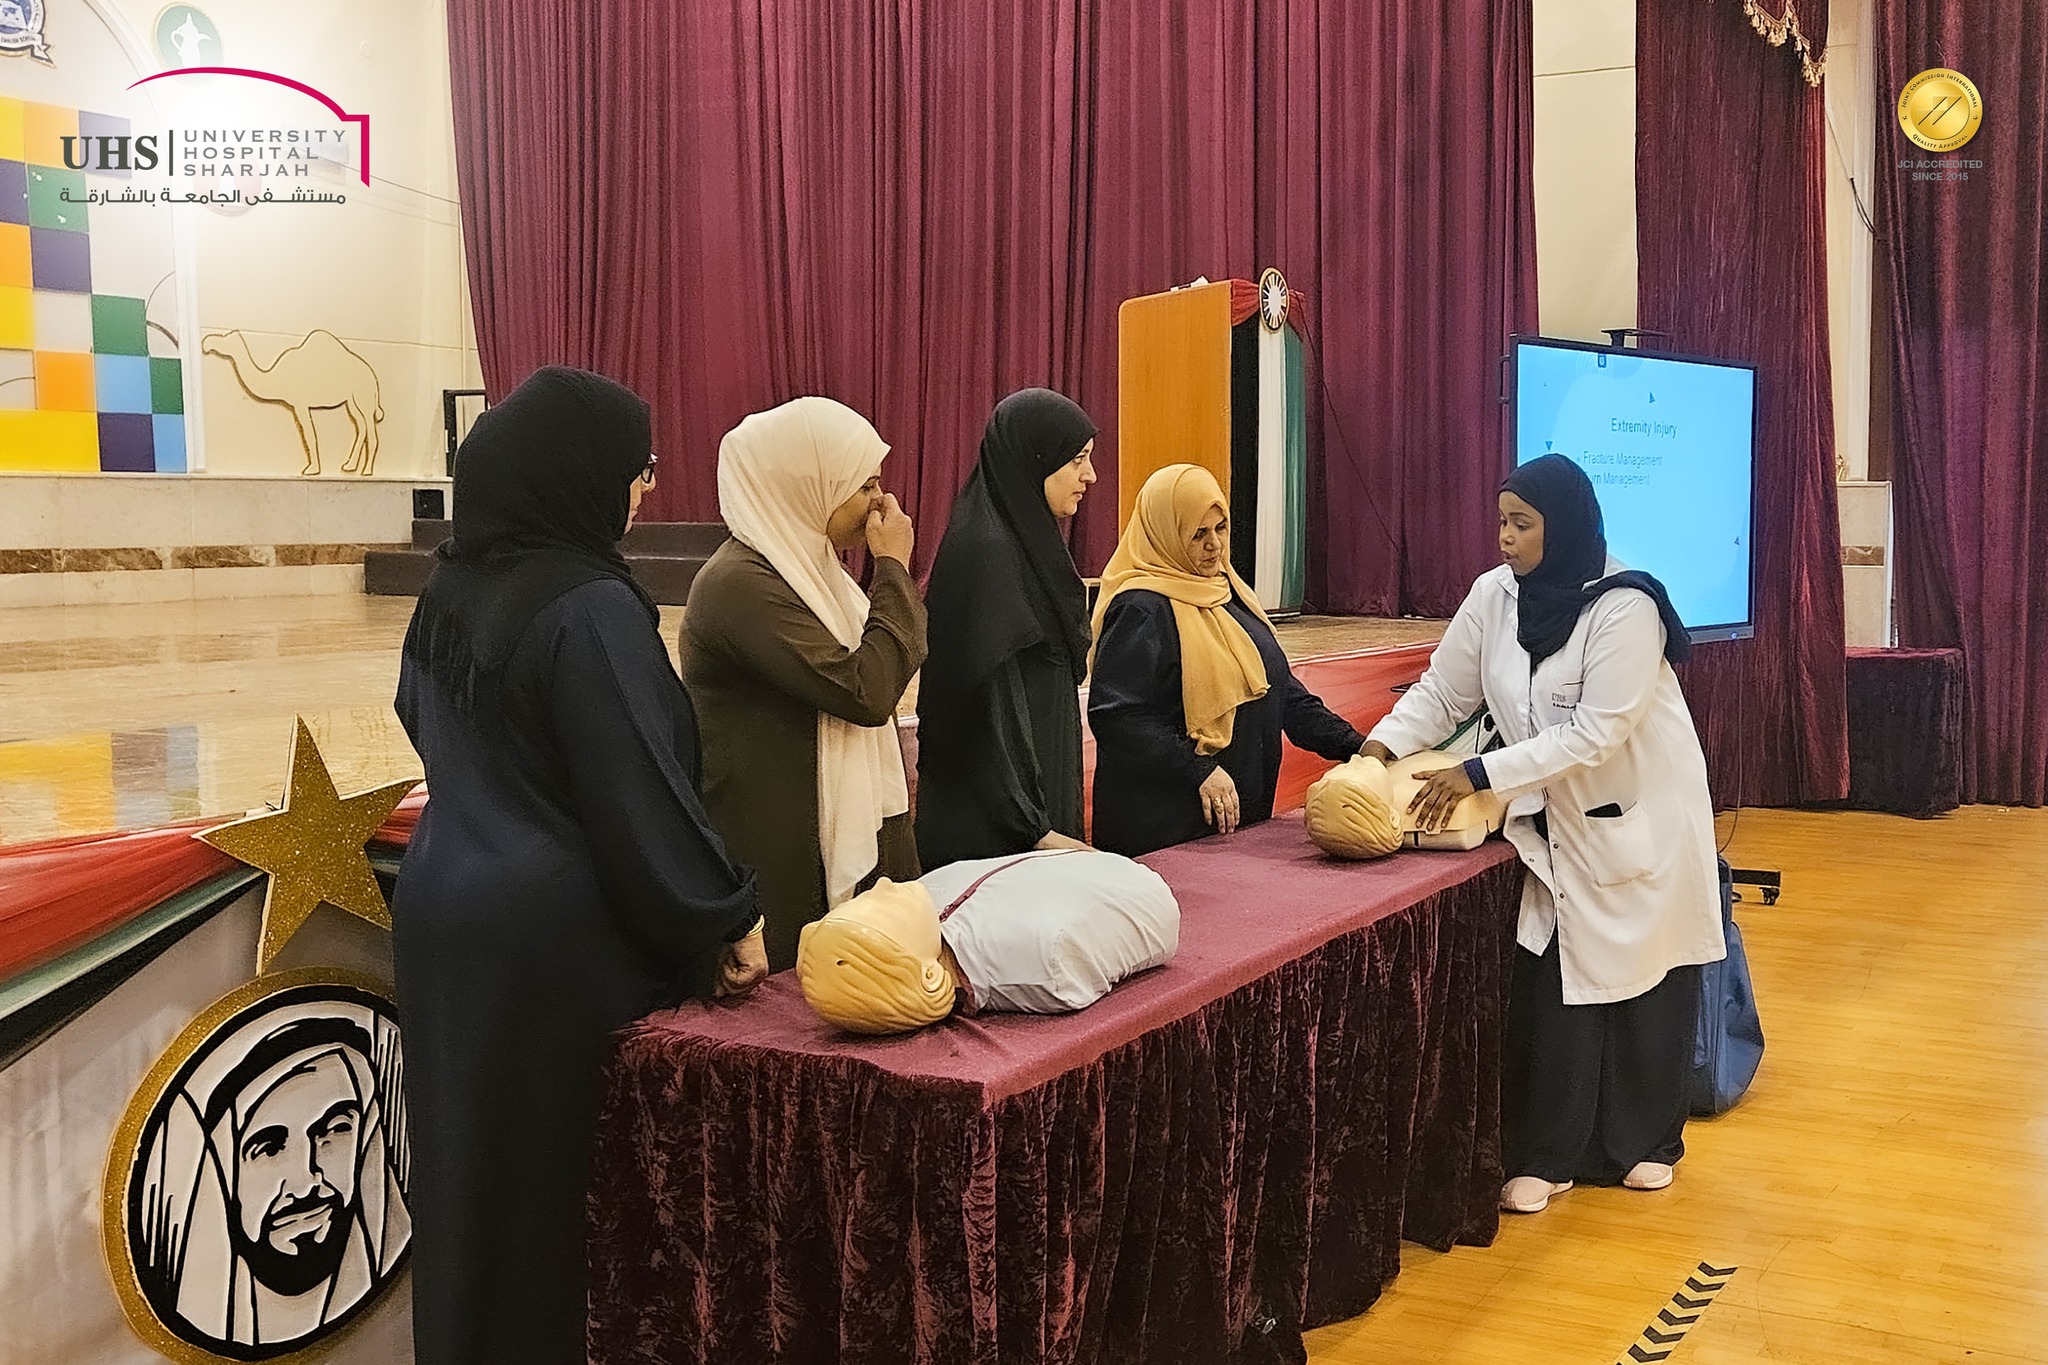 First Aid Workshop " Every Second Counts"